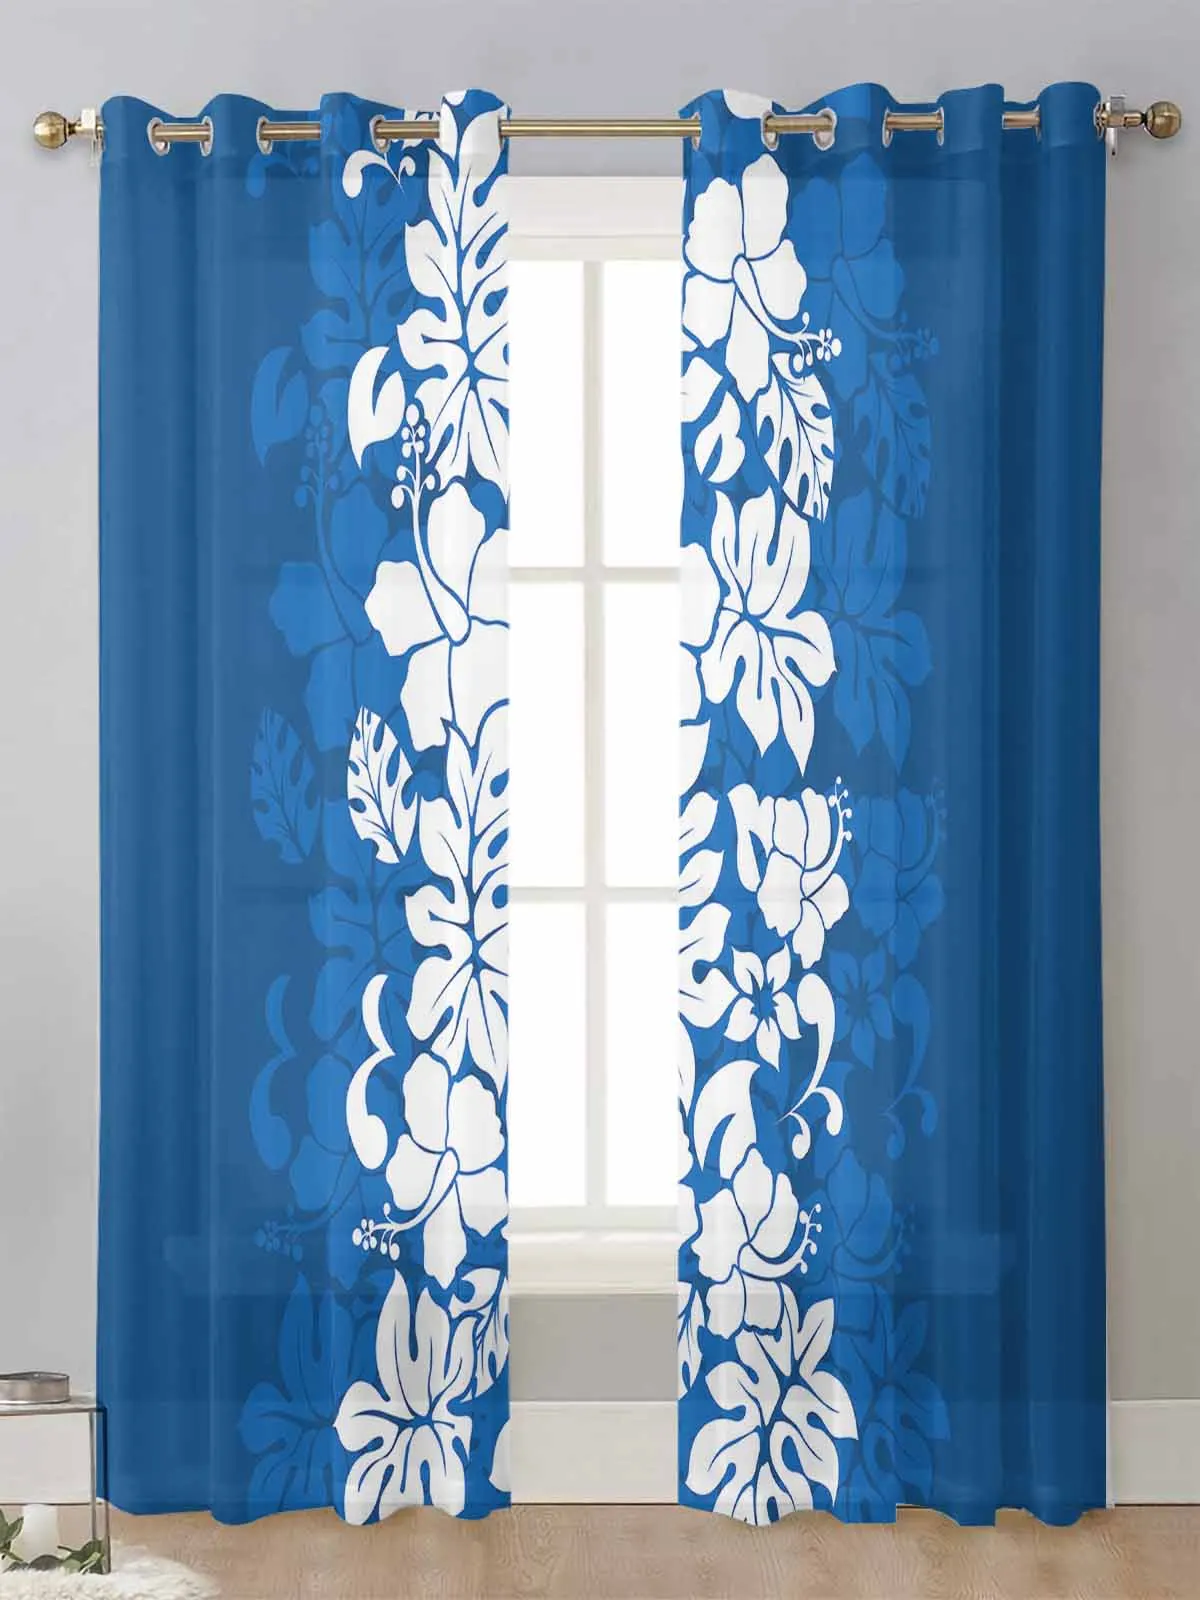 

Hawaiian Tropical Flower Blue Sheer Curtains For Living Room Window Transparent Voile Tulle Curtain Cortinas Drapes Home Decor